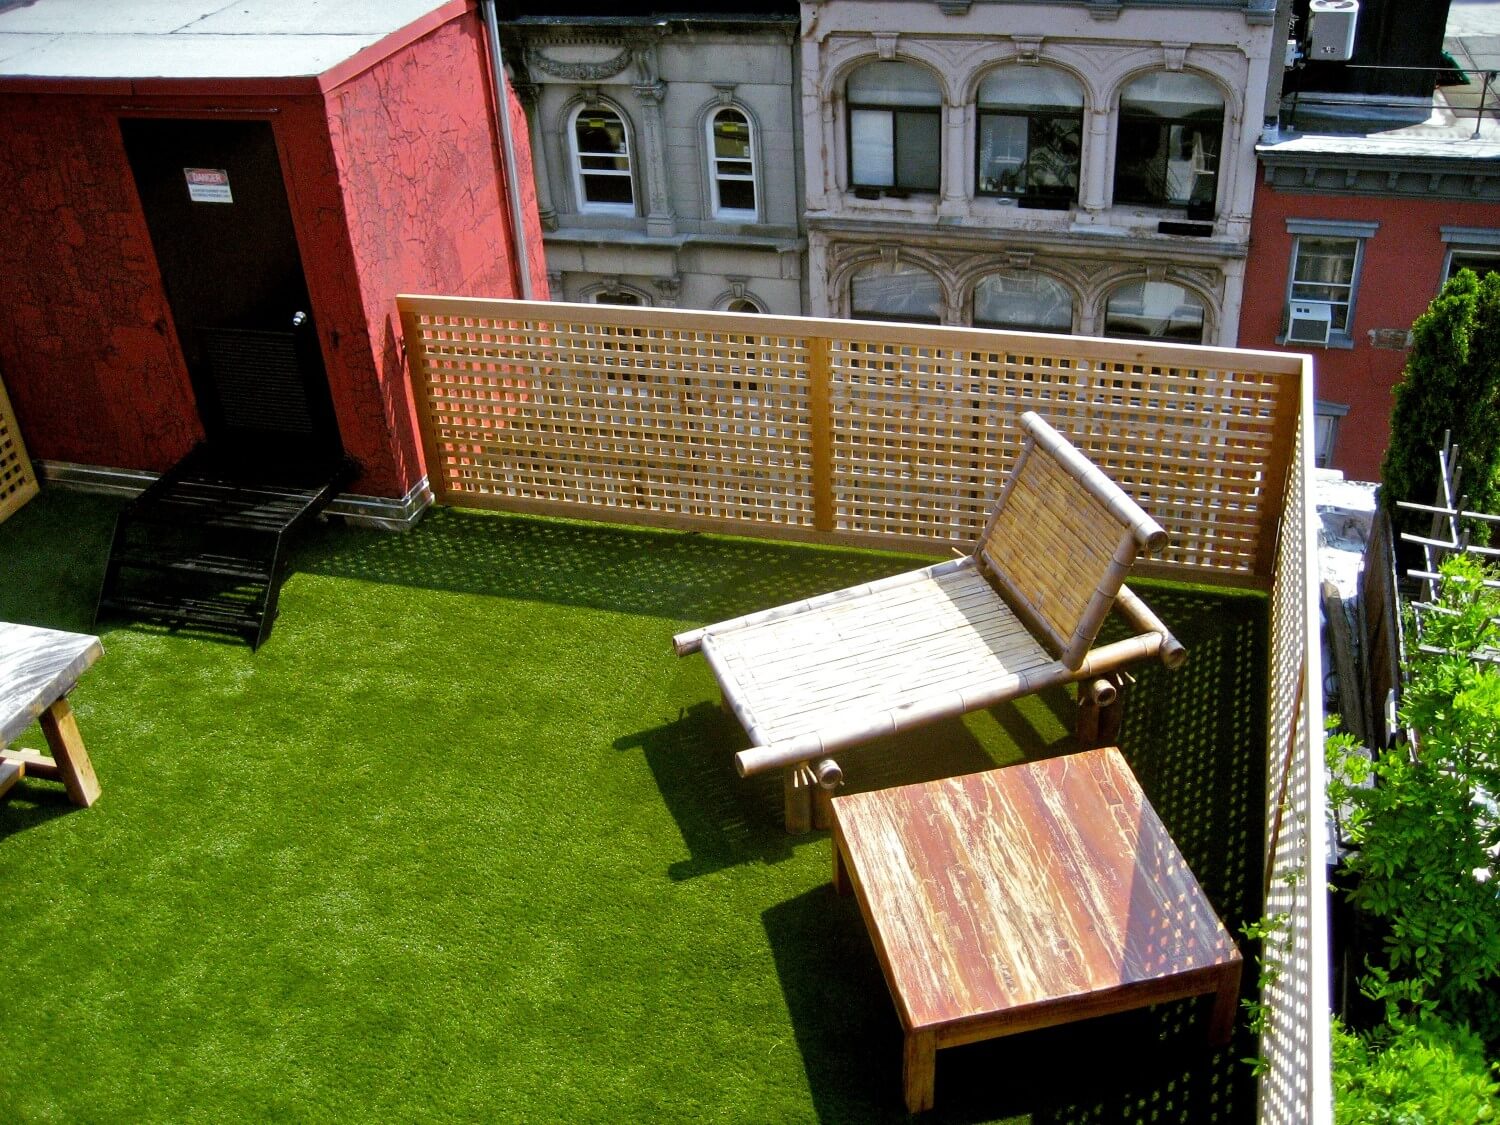 Apartment rooftop patio with artificial grass